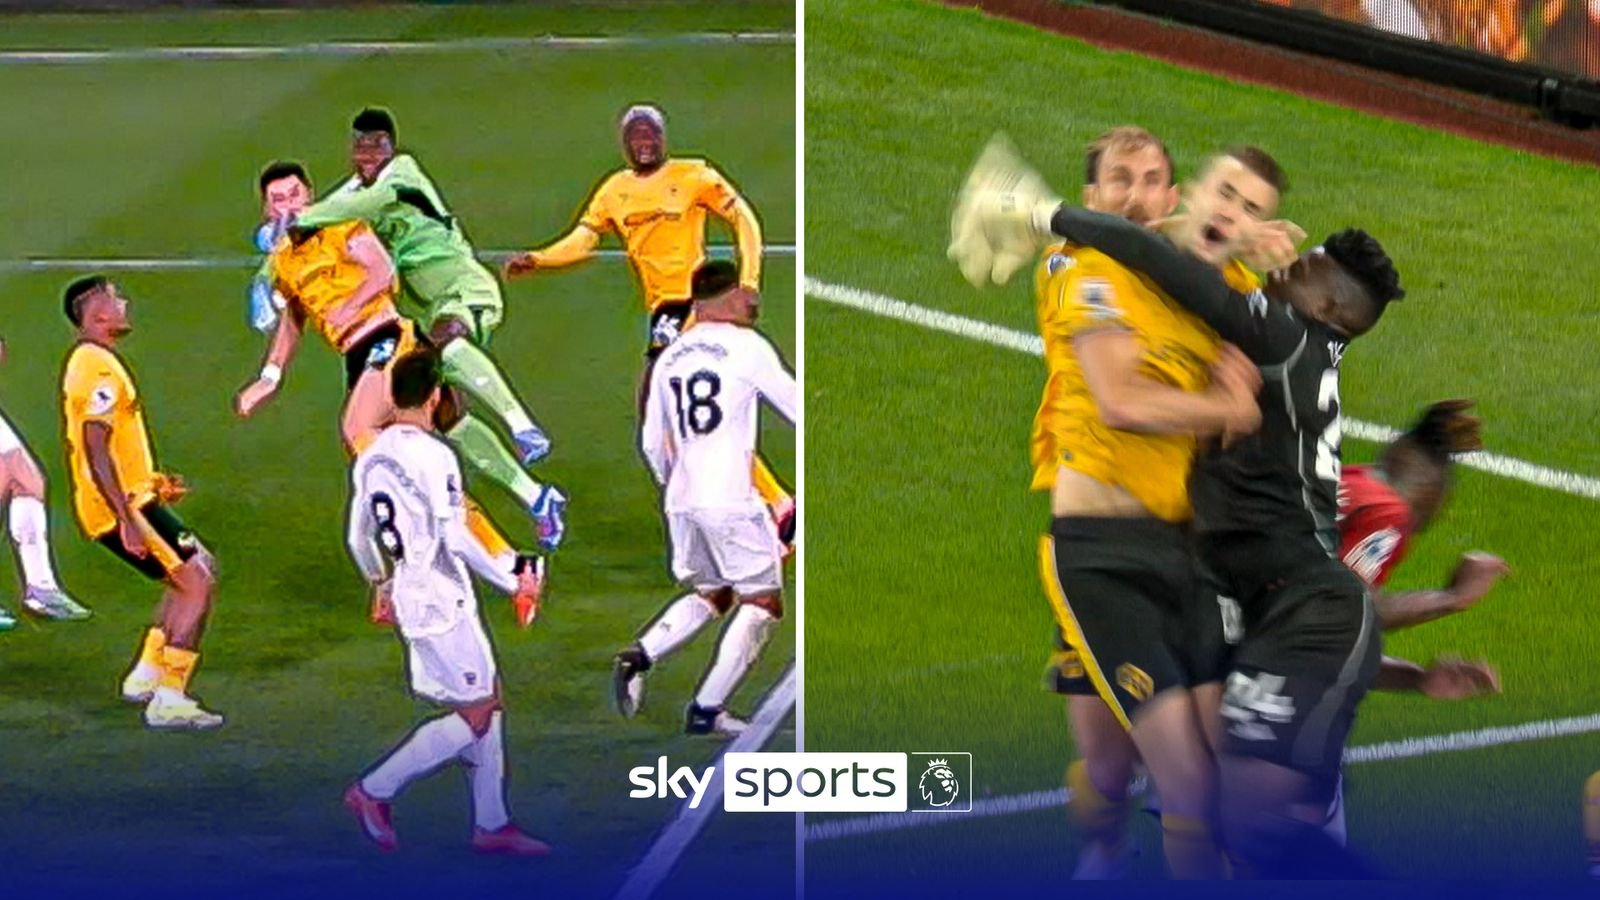 Deja vu? Onana clatters into Wolves player and escapes penalty scare again!